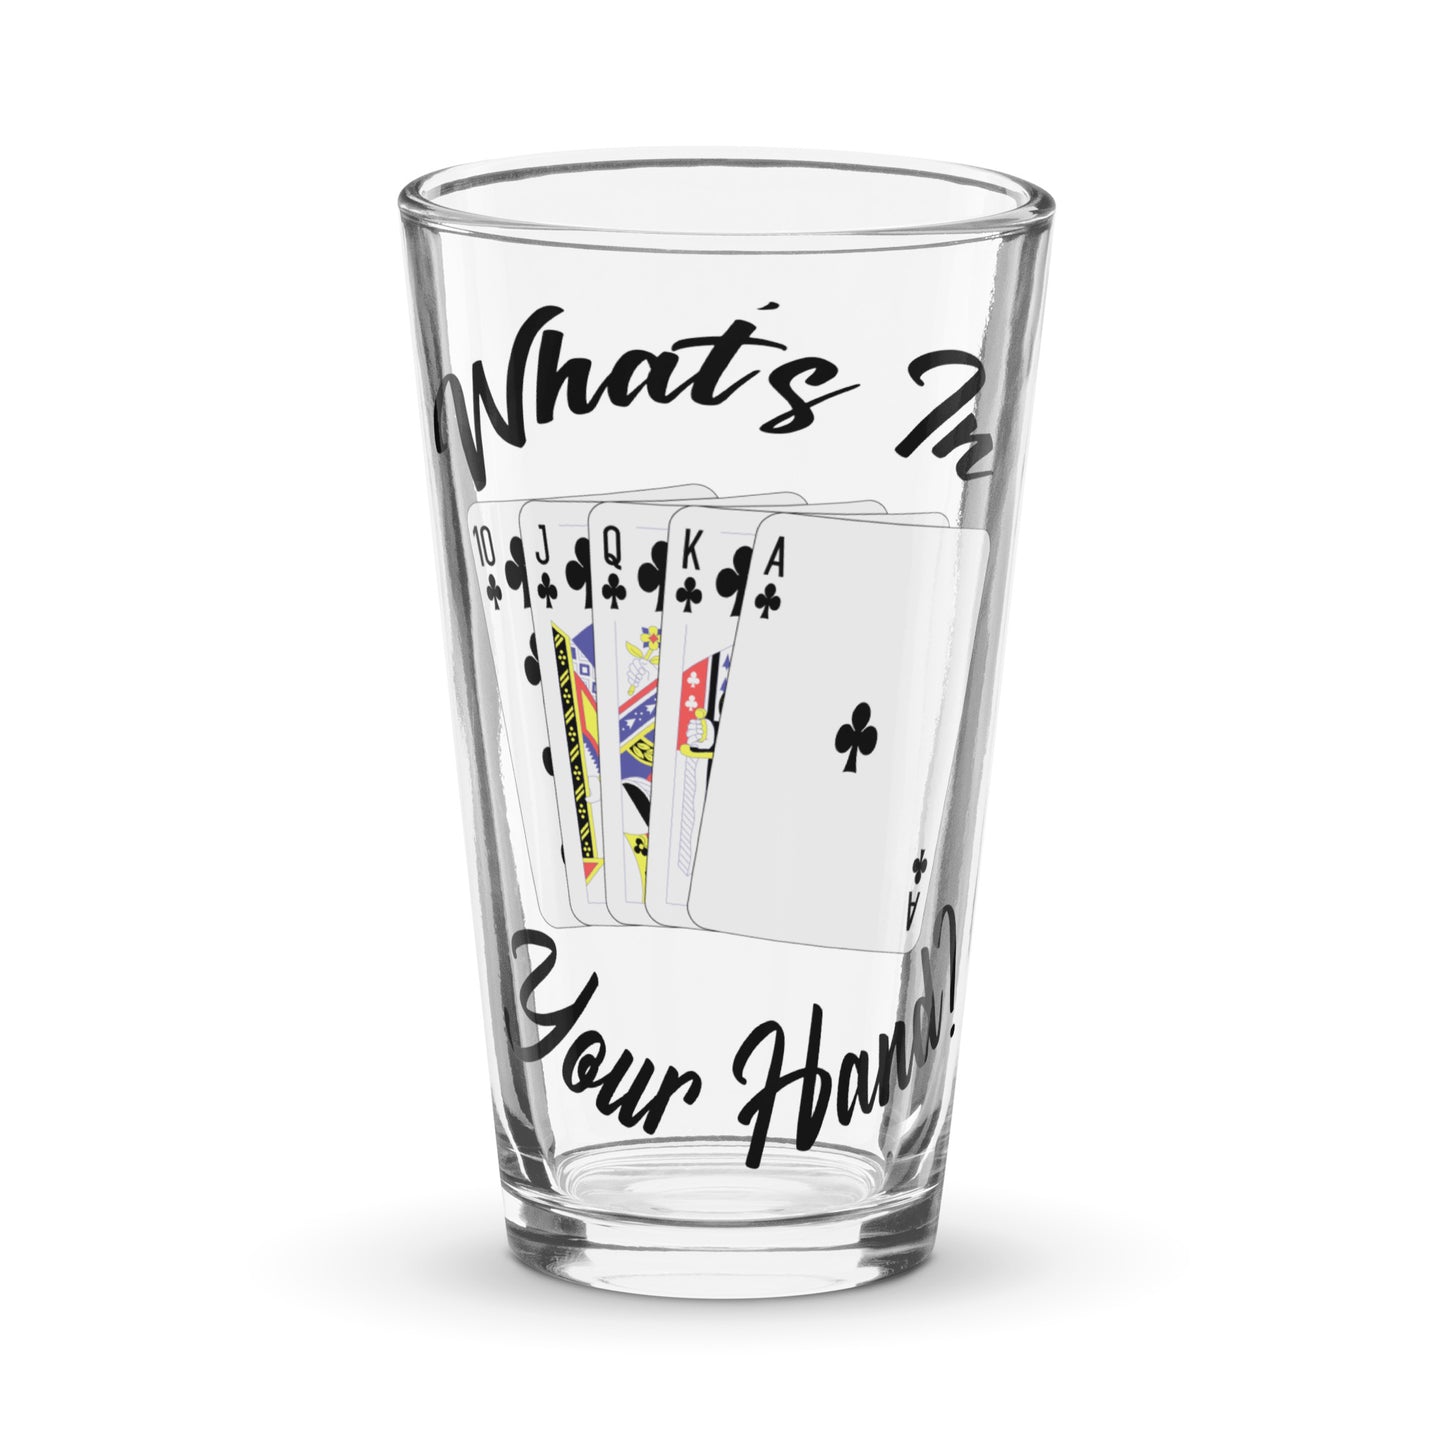 Clubs 29 Cribbage Hand 16 oz Shaker Pint Glass